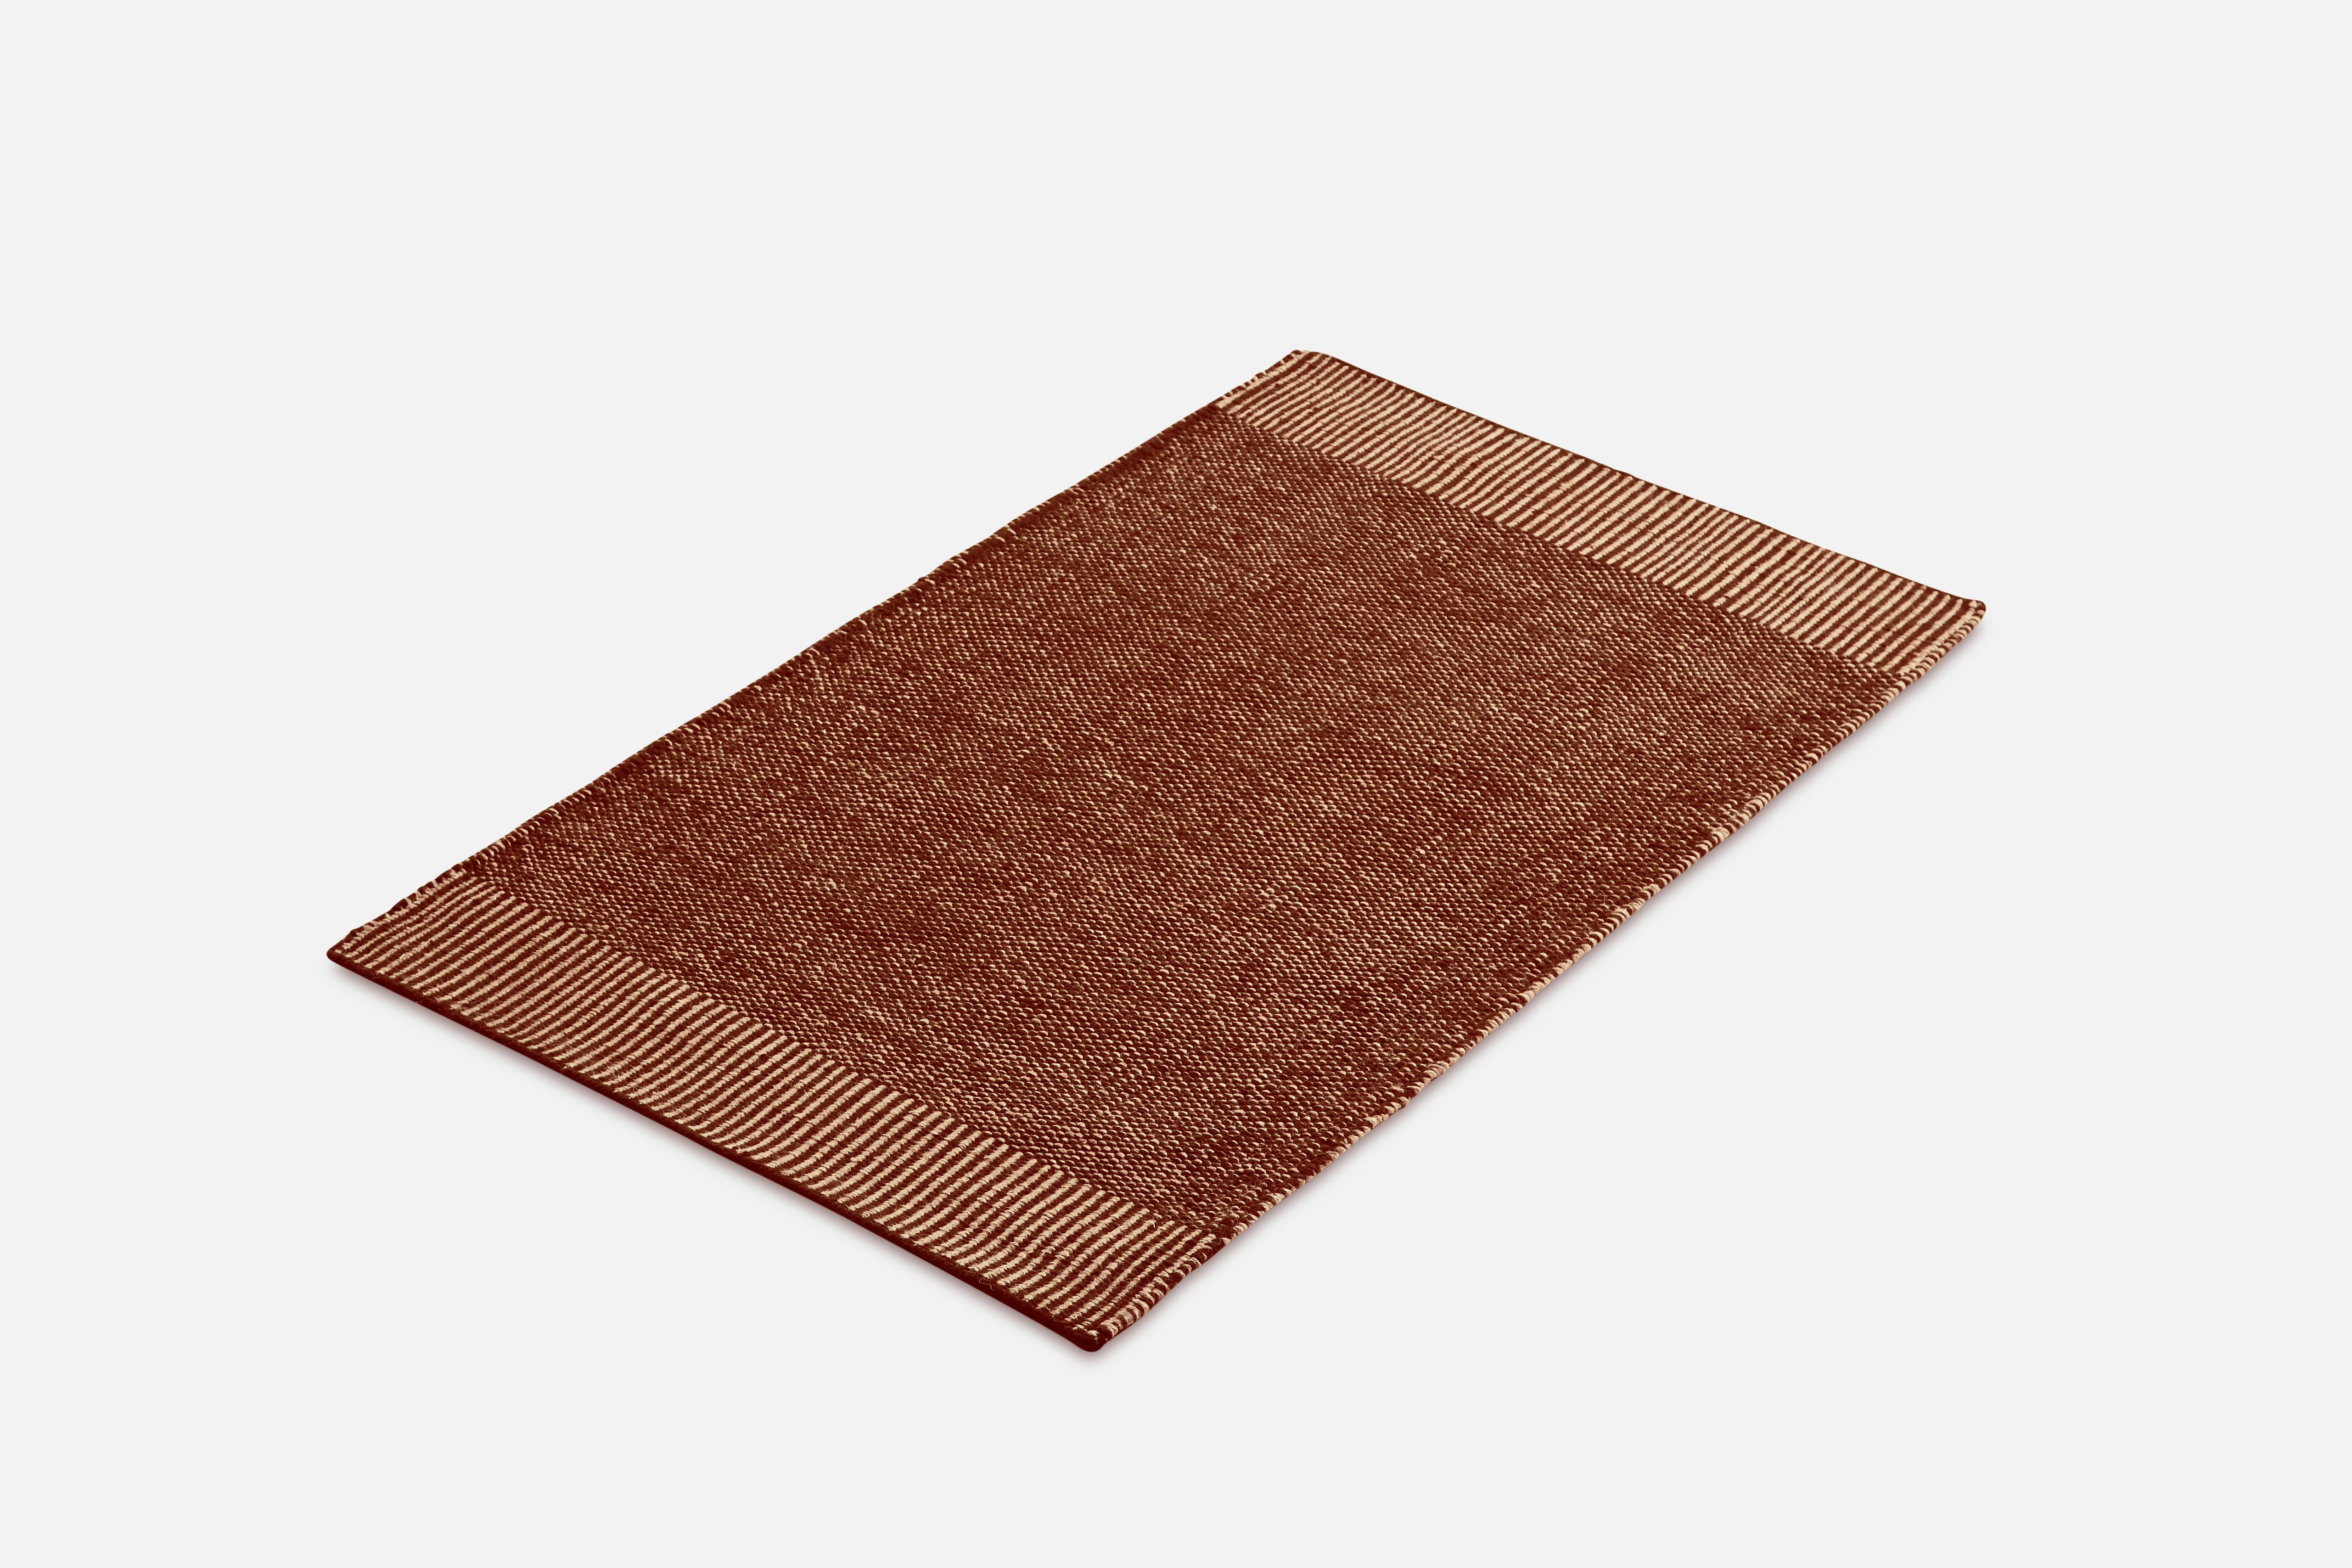 Small rust Rombo rug by Studio MLR
Materials: 65% wool, 35% jute.
Dimensions: W 90 x L 140 cm
Available in 3 sizes: W90 x L140, W170 x L240, W75 x L200 cm.
Available in grey, moss green and rust.

Rombo is characterised by the materials used